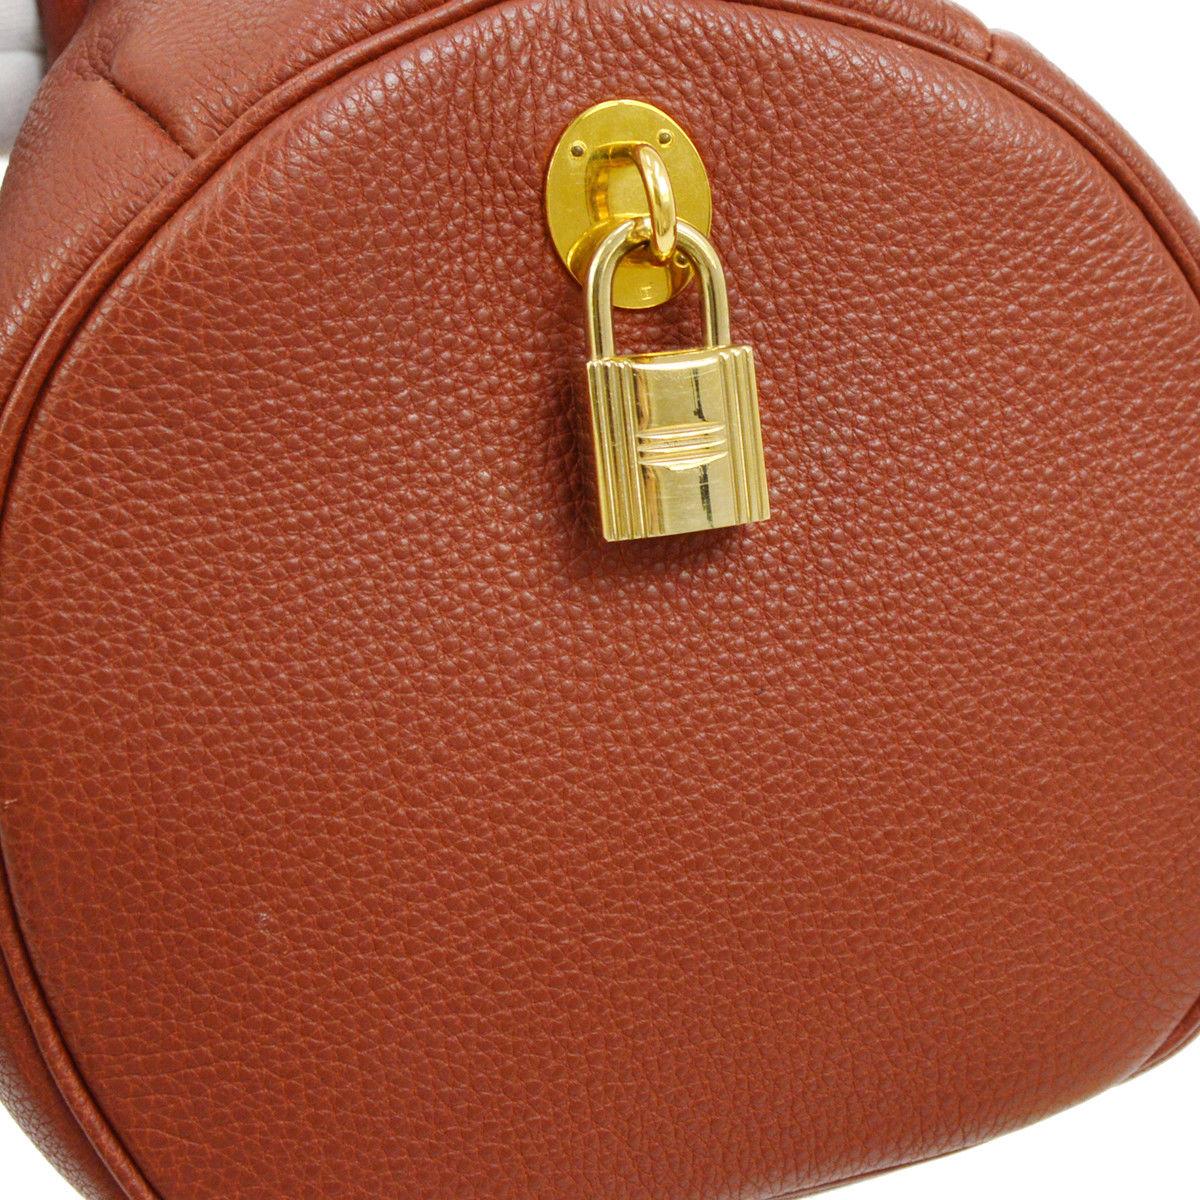 Hermes Leather Top Handle Large Men's Women's Weekender Carryall Travel Bag

Leather
Zipper closure
Leather lining
Date code present
Made in France
Handle drop 2.5